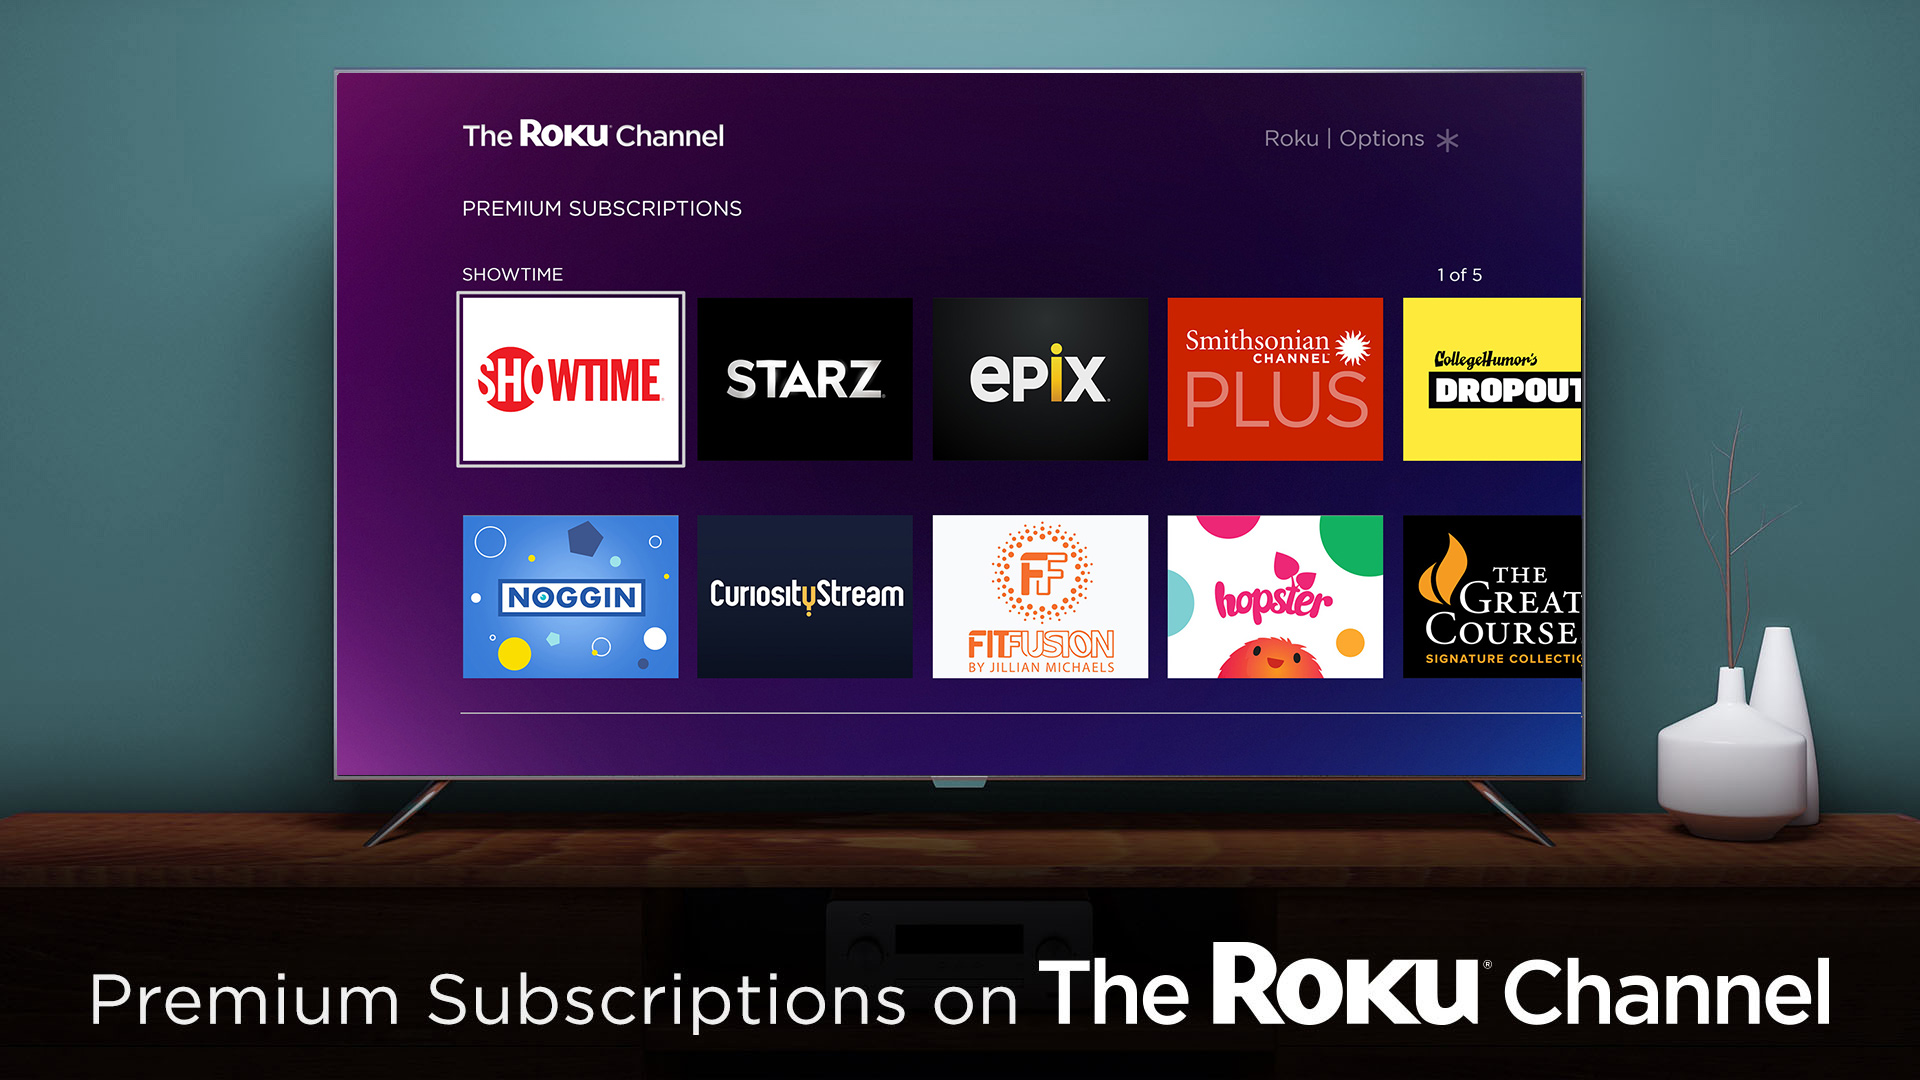 The Roku Channel adds premium subscriptions alongside its free content